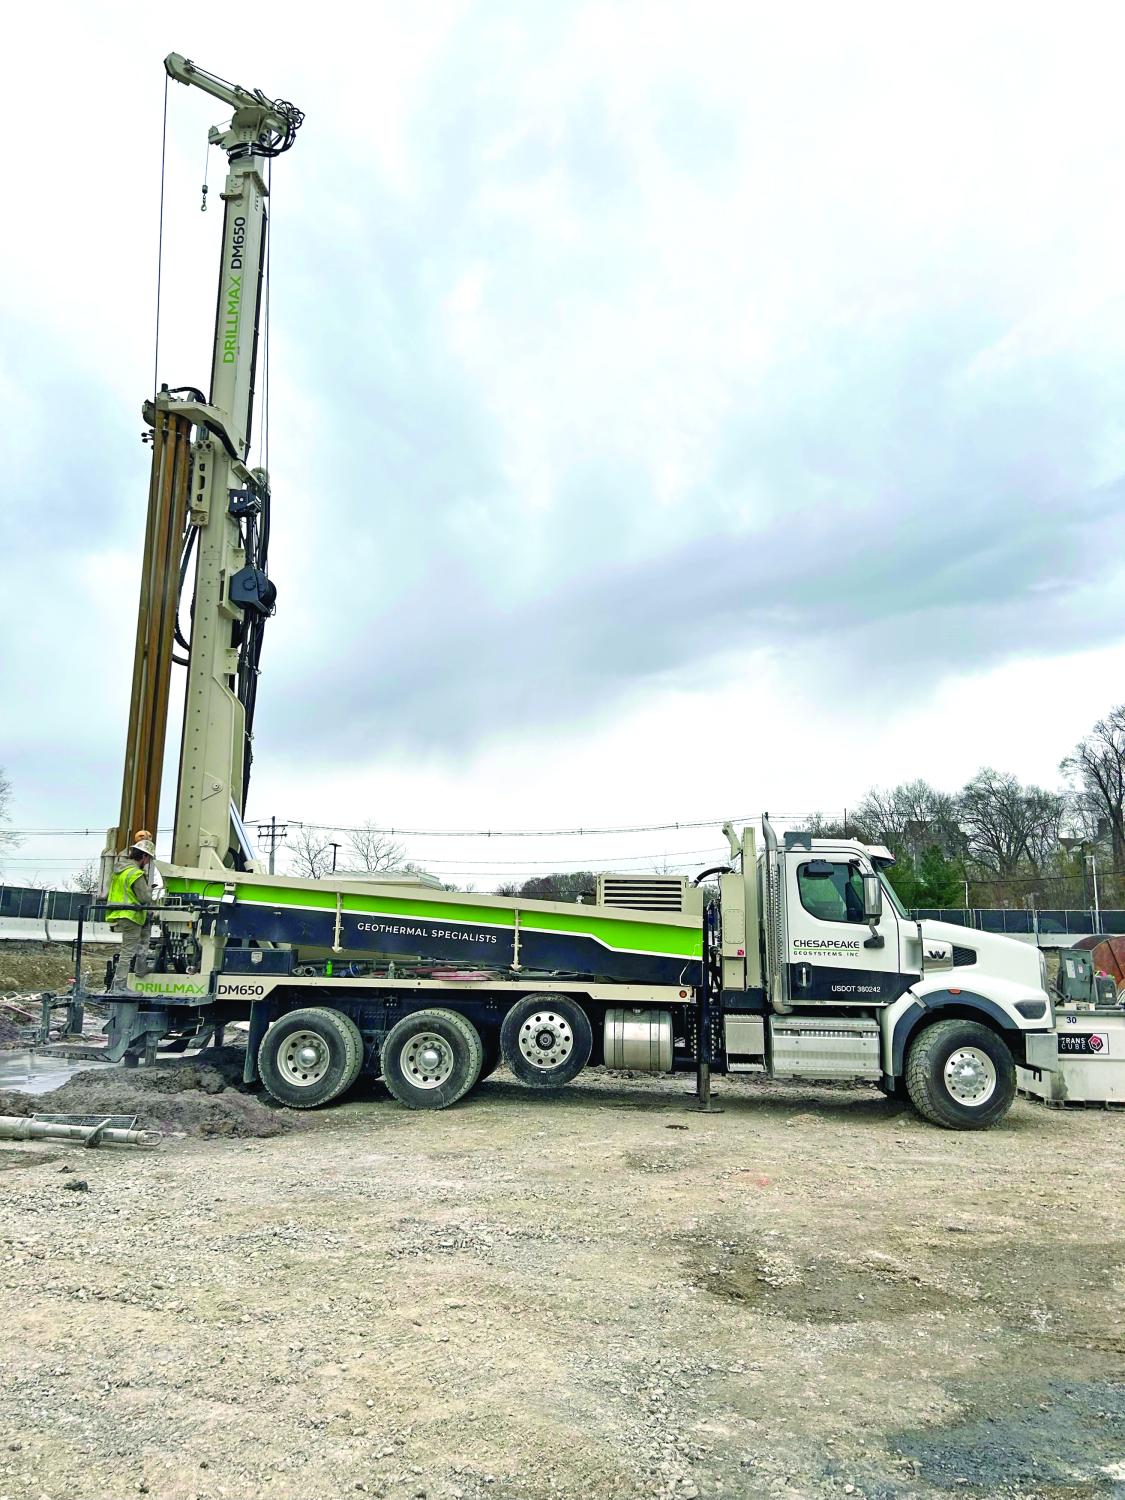 Production efficiency of DM650 air-powered well drill combined with industry-leading manufacturer's service support provides solid solution for geothermal energy projects.